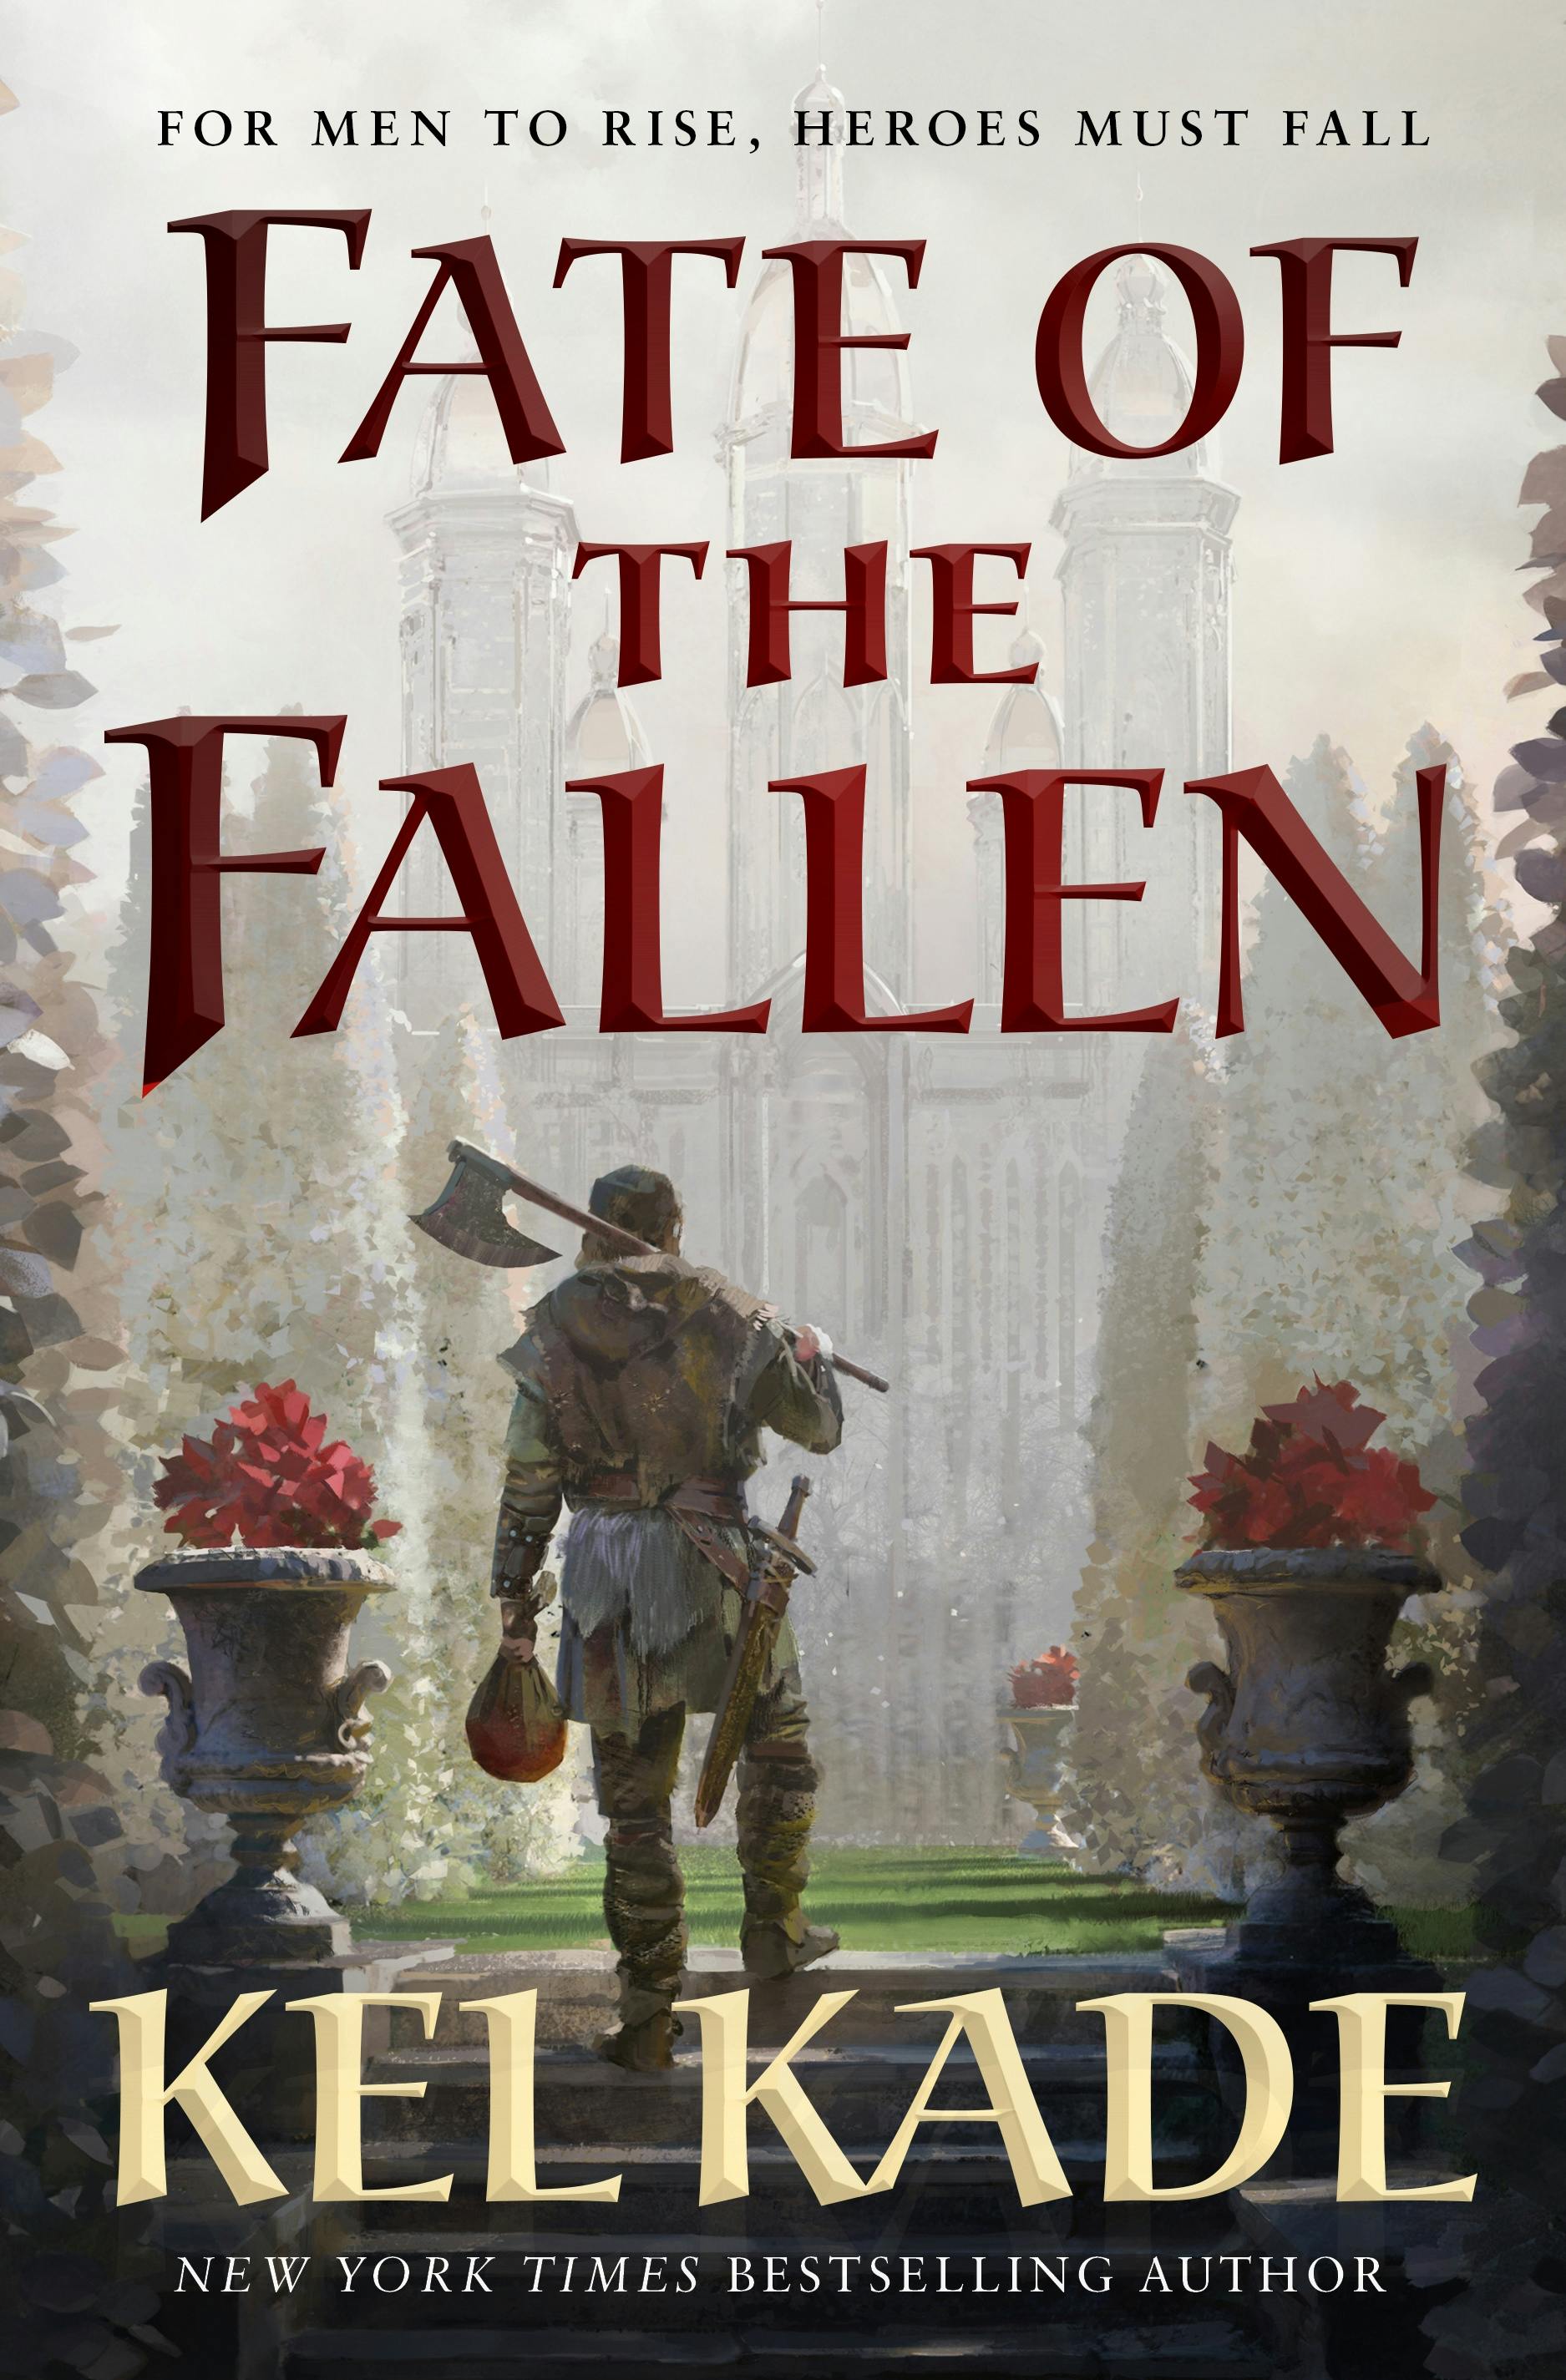 Cover for the book titled as: Fate of the Fallen